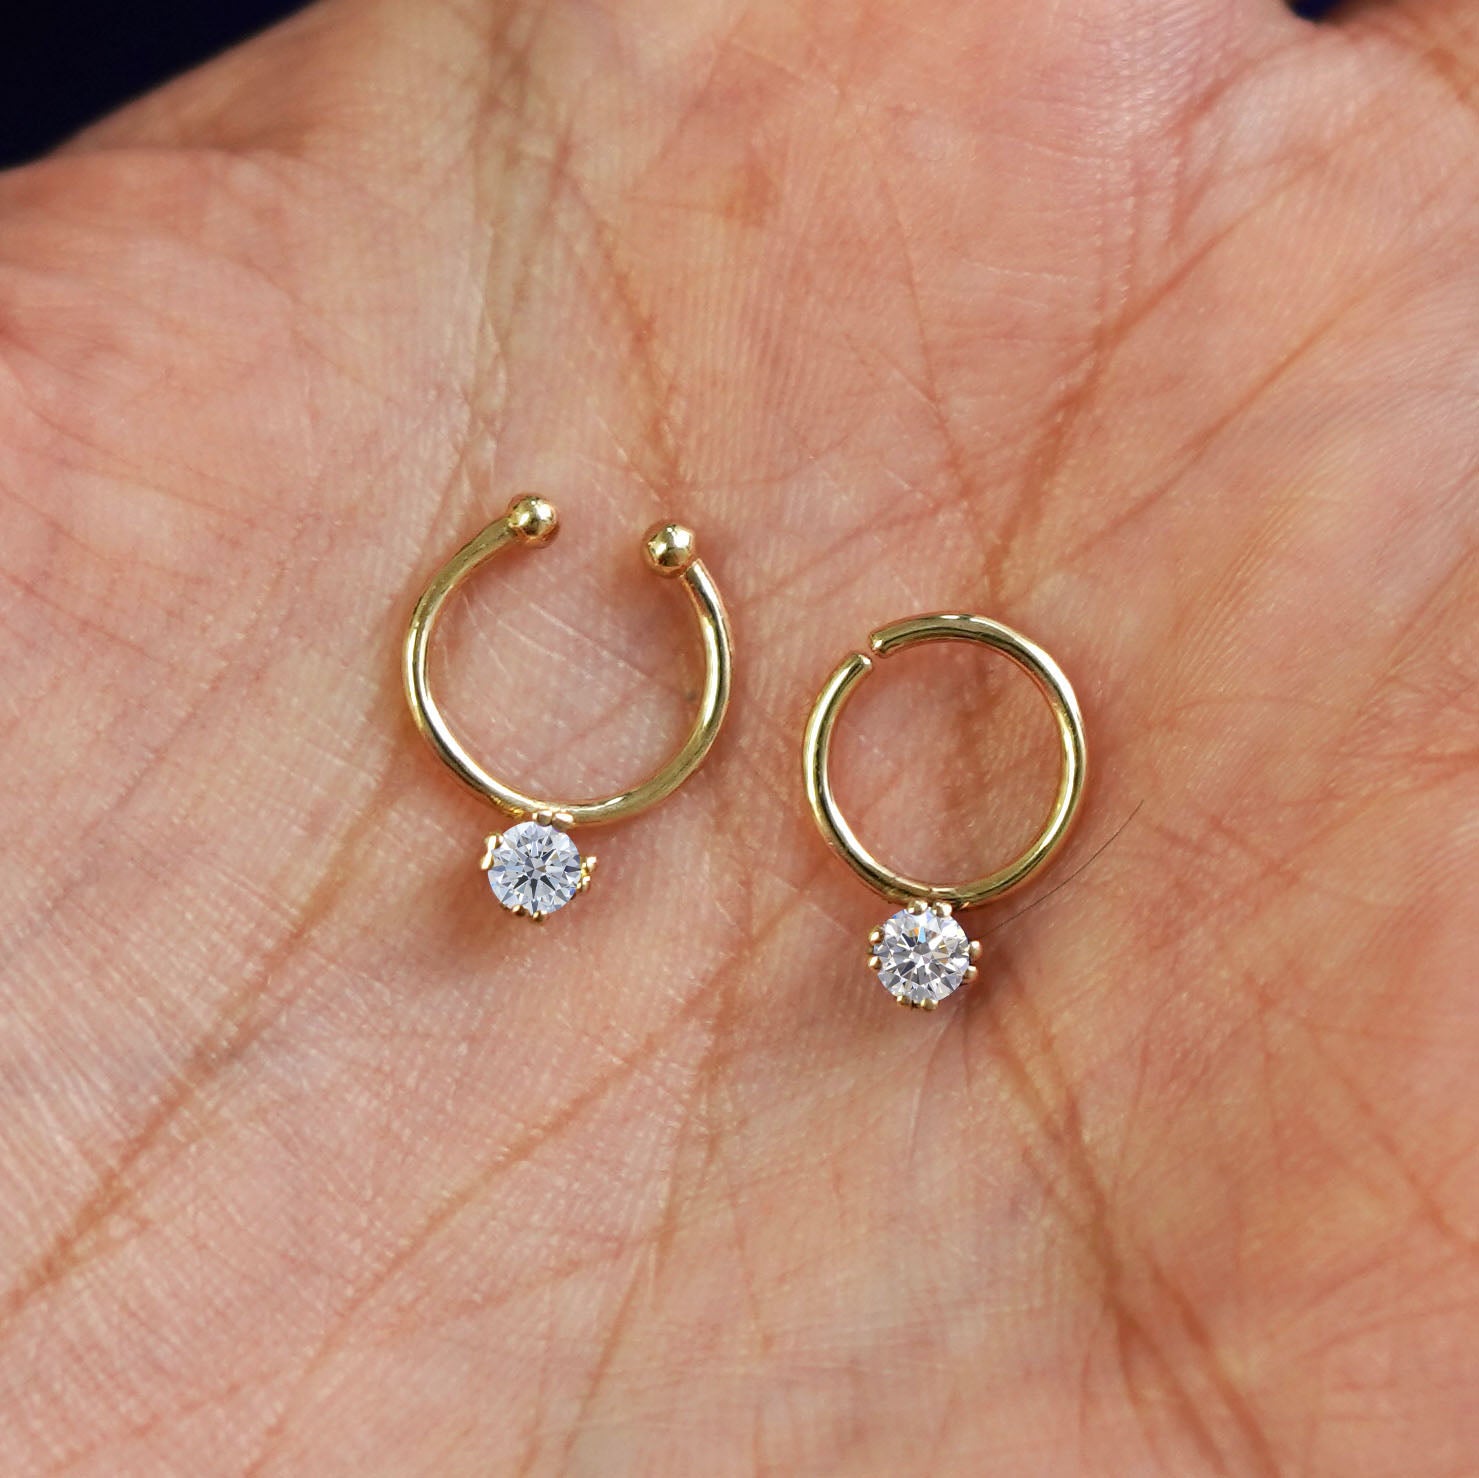 One Non-Pierced diamond and one Pierced diamond Septum ring both in 8mm resting in the palm of a model's hand